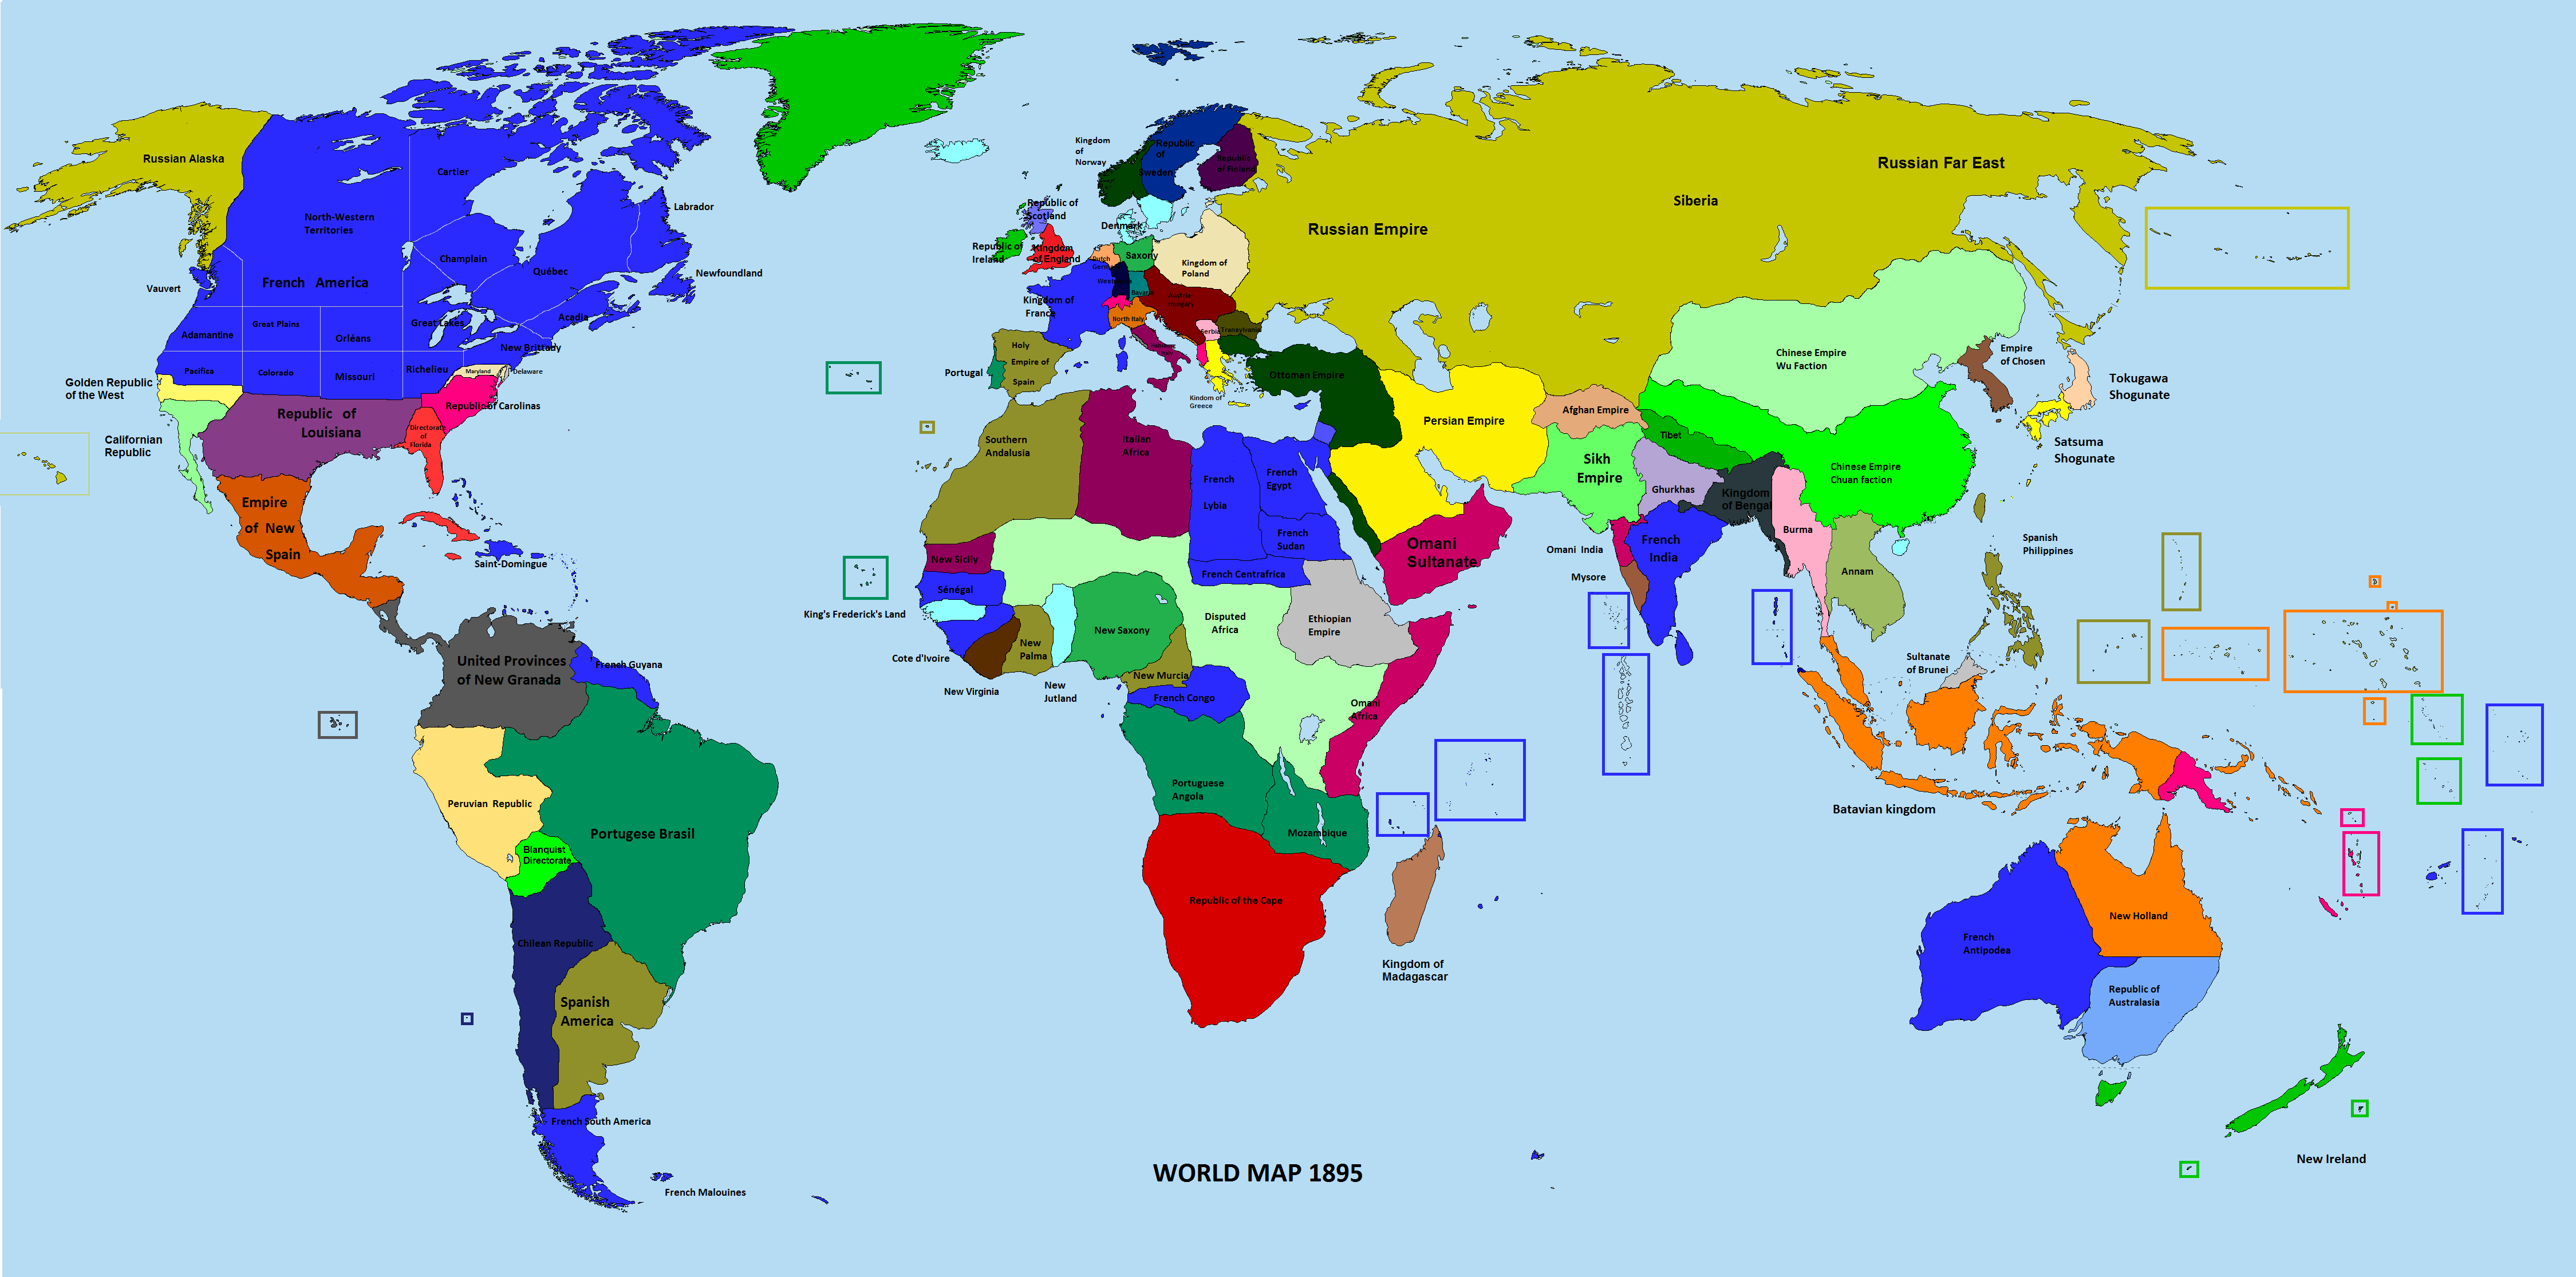 World map 1895.png